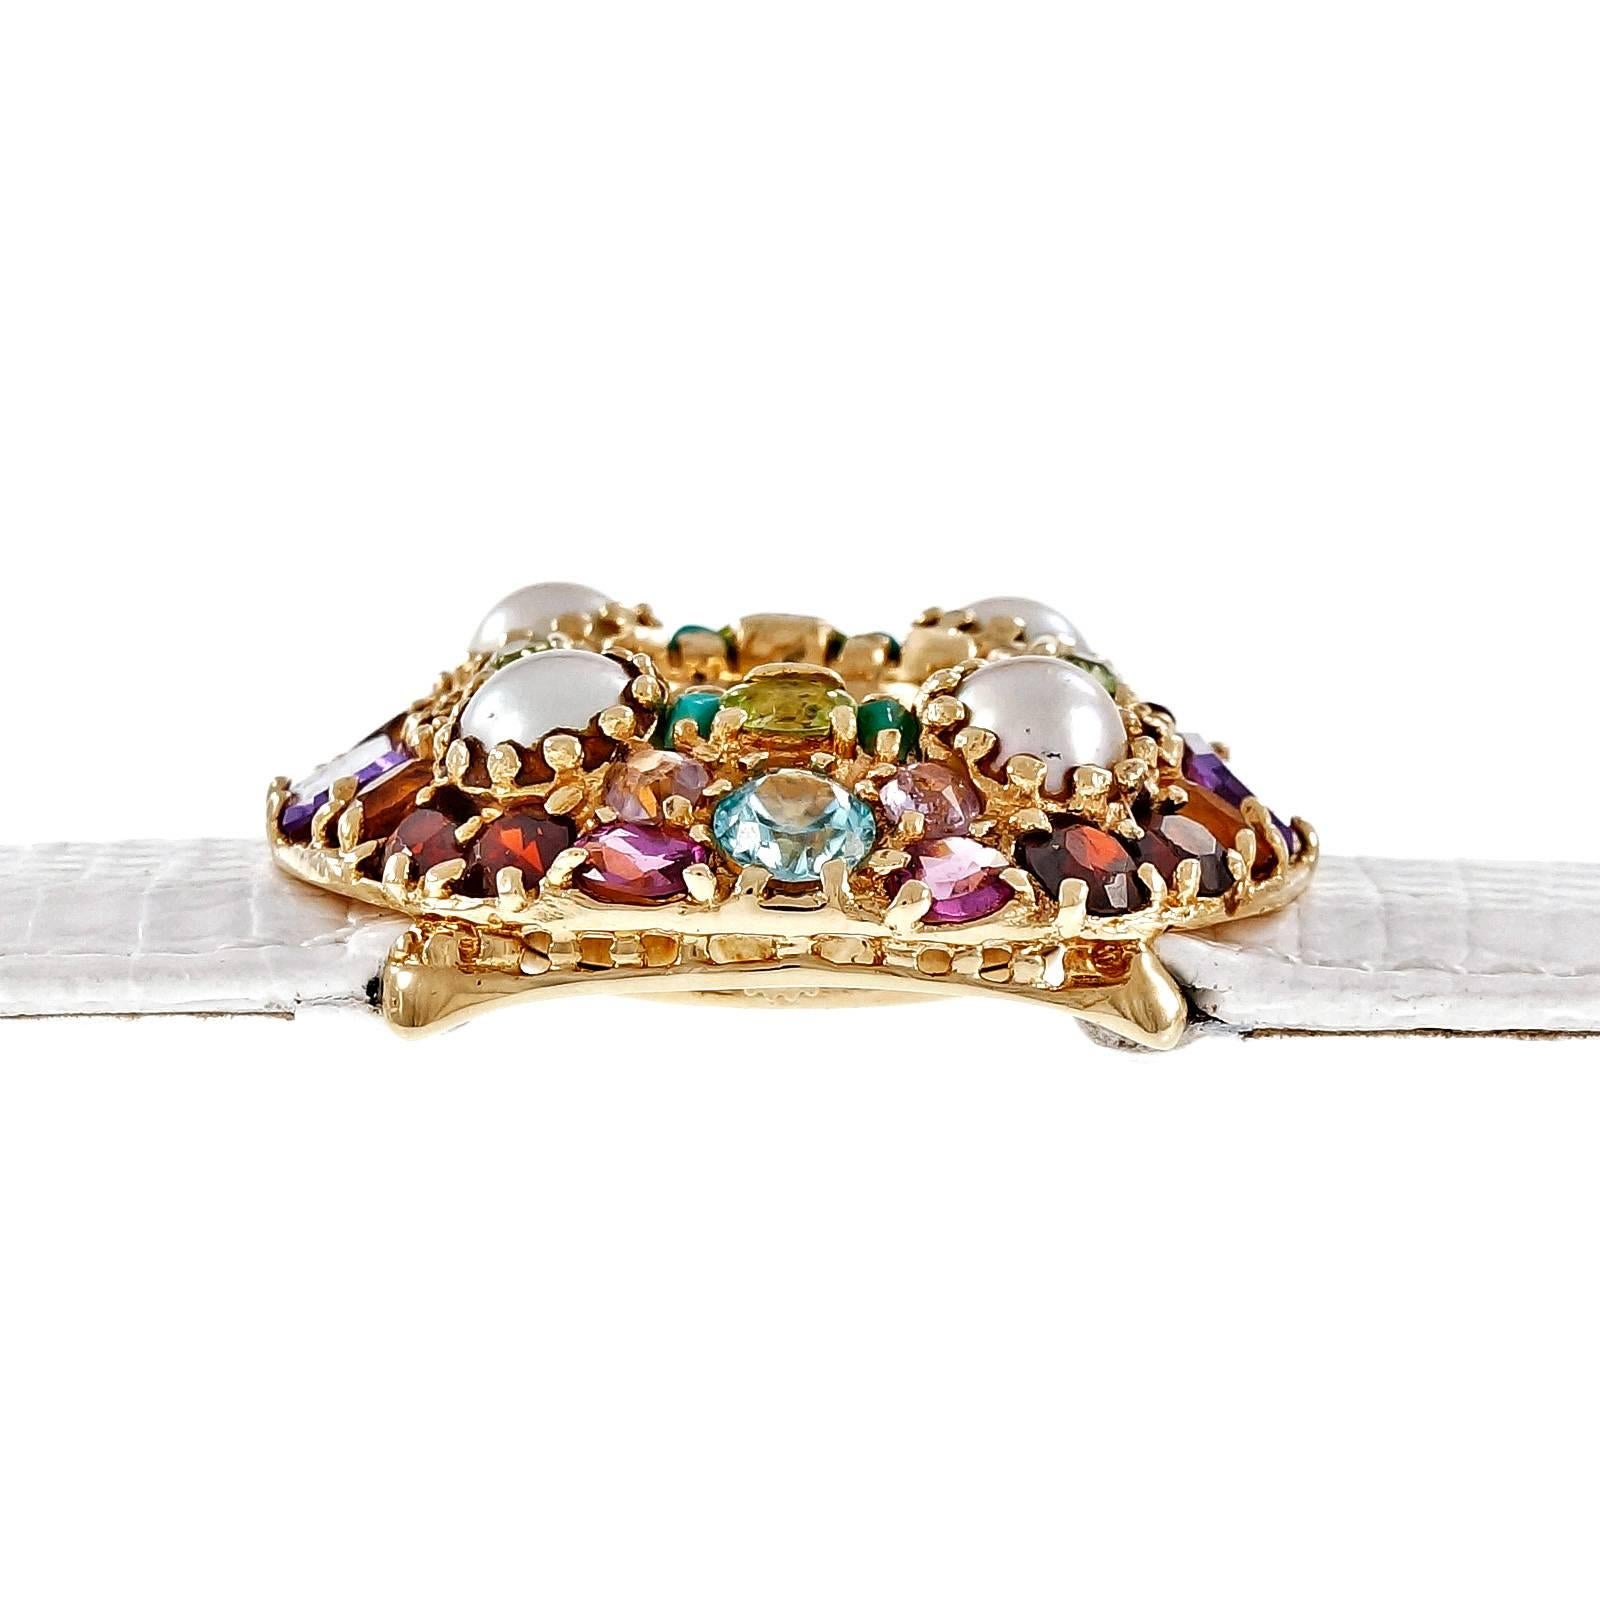 Lucien Piccard 1960’s multi stone multi-color fashion watch in 14k yellow gold with wide white band. Manual wind and 17 jewel movement. Case set with genuine Amethyst, Garnet, Ruby, Turquoise, Blue Zircon, Peridot and Citrine.

14k yellow